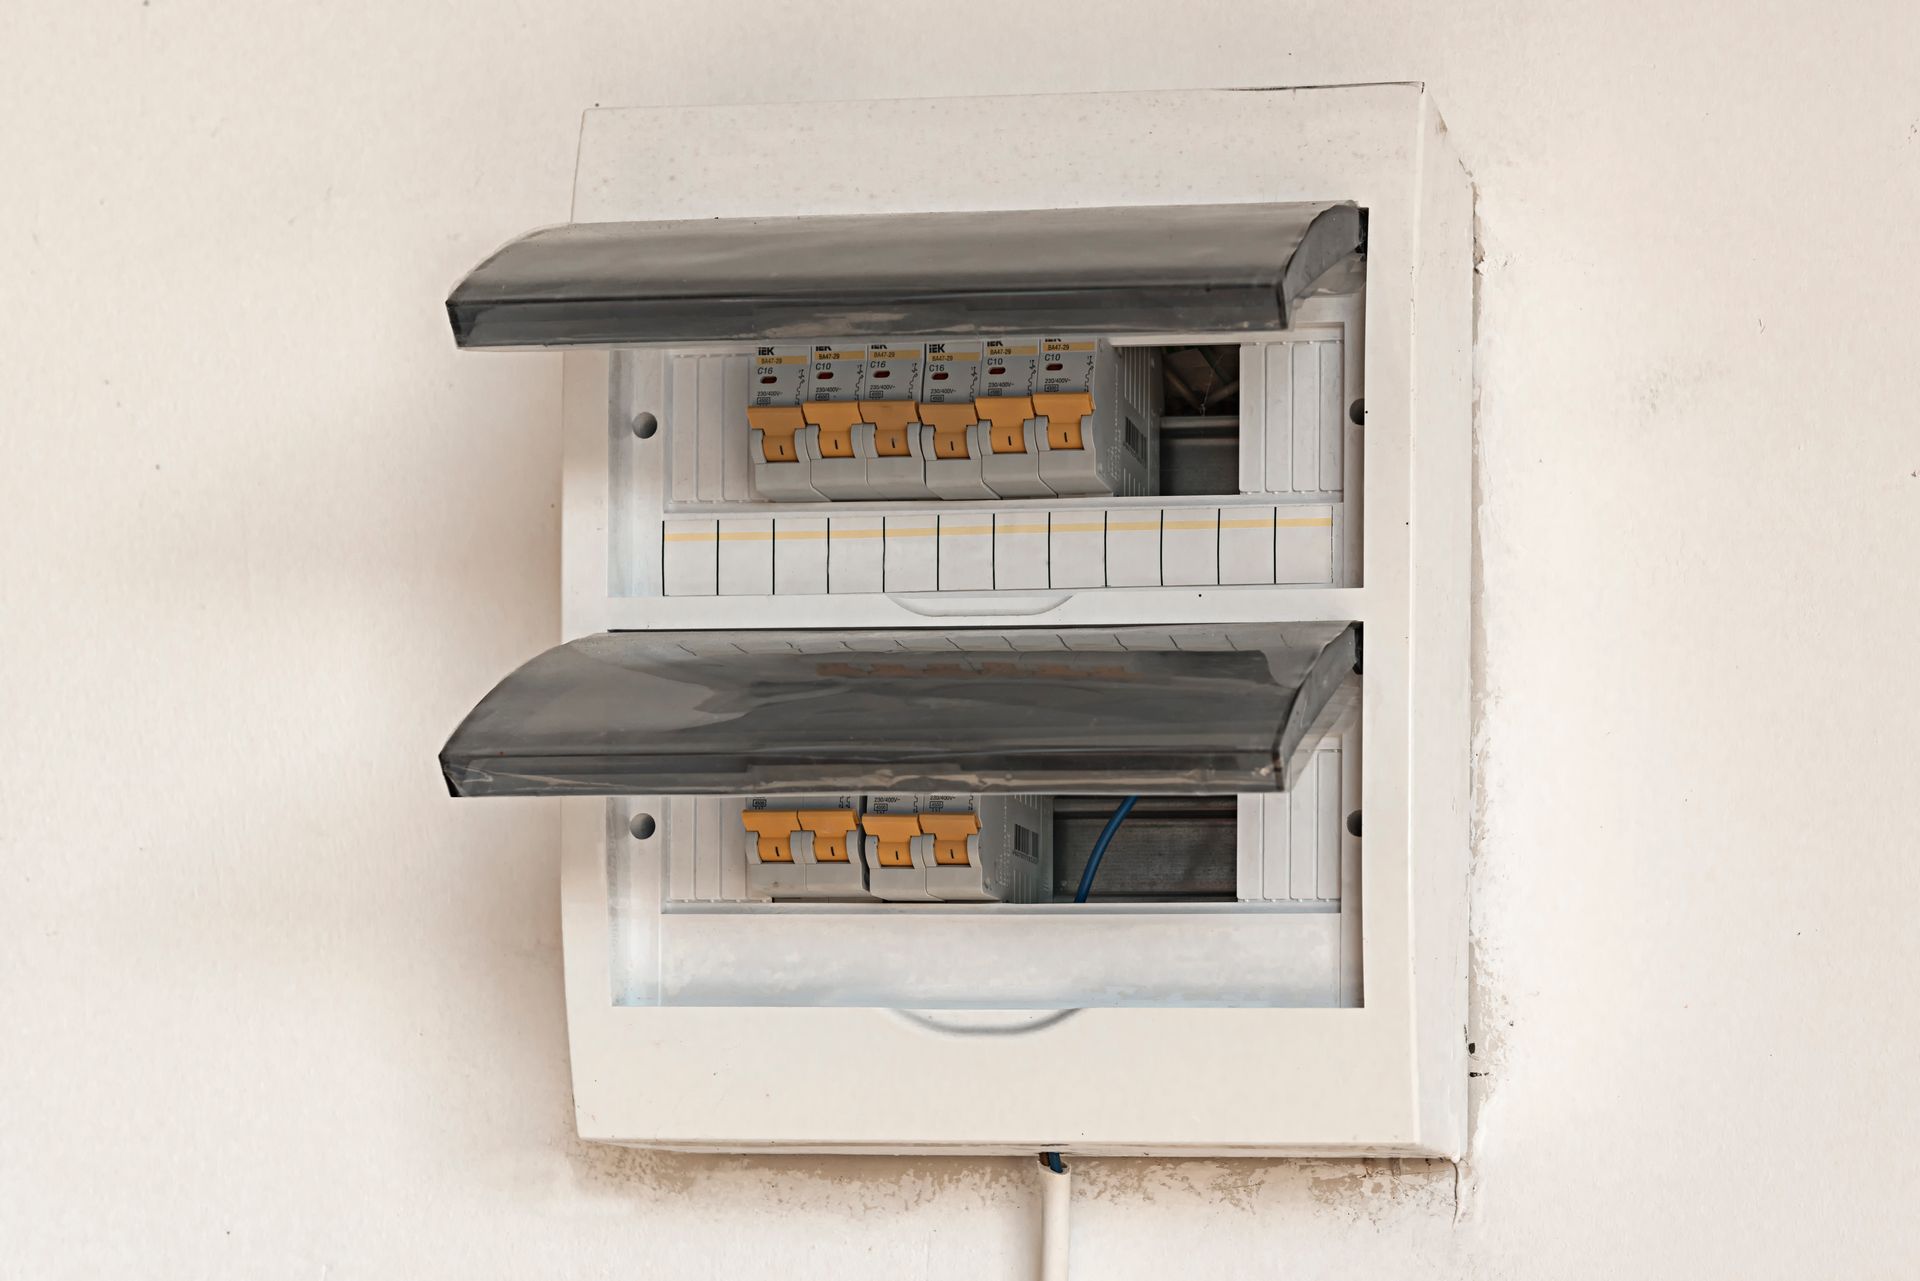 the panel of the electric power distributor with a block of switches and fuses